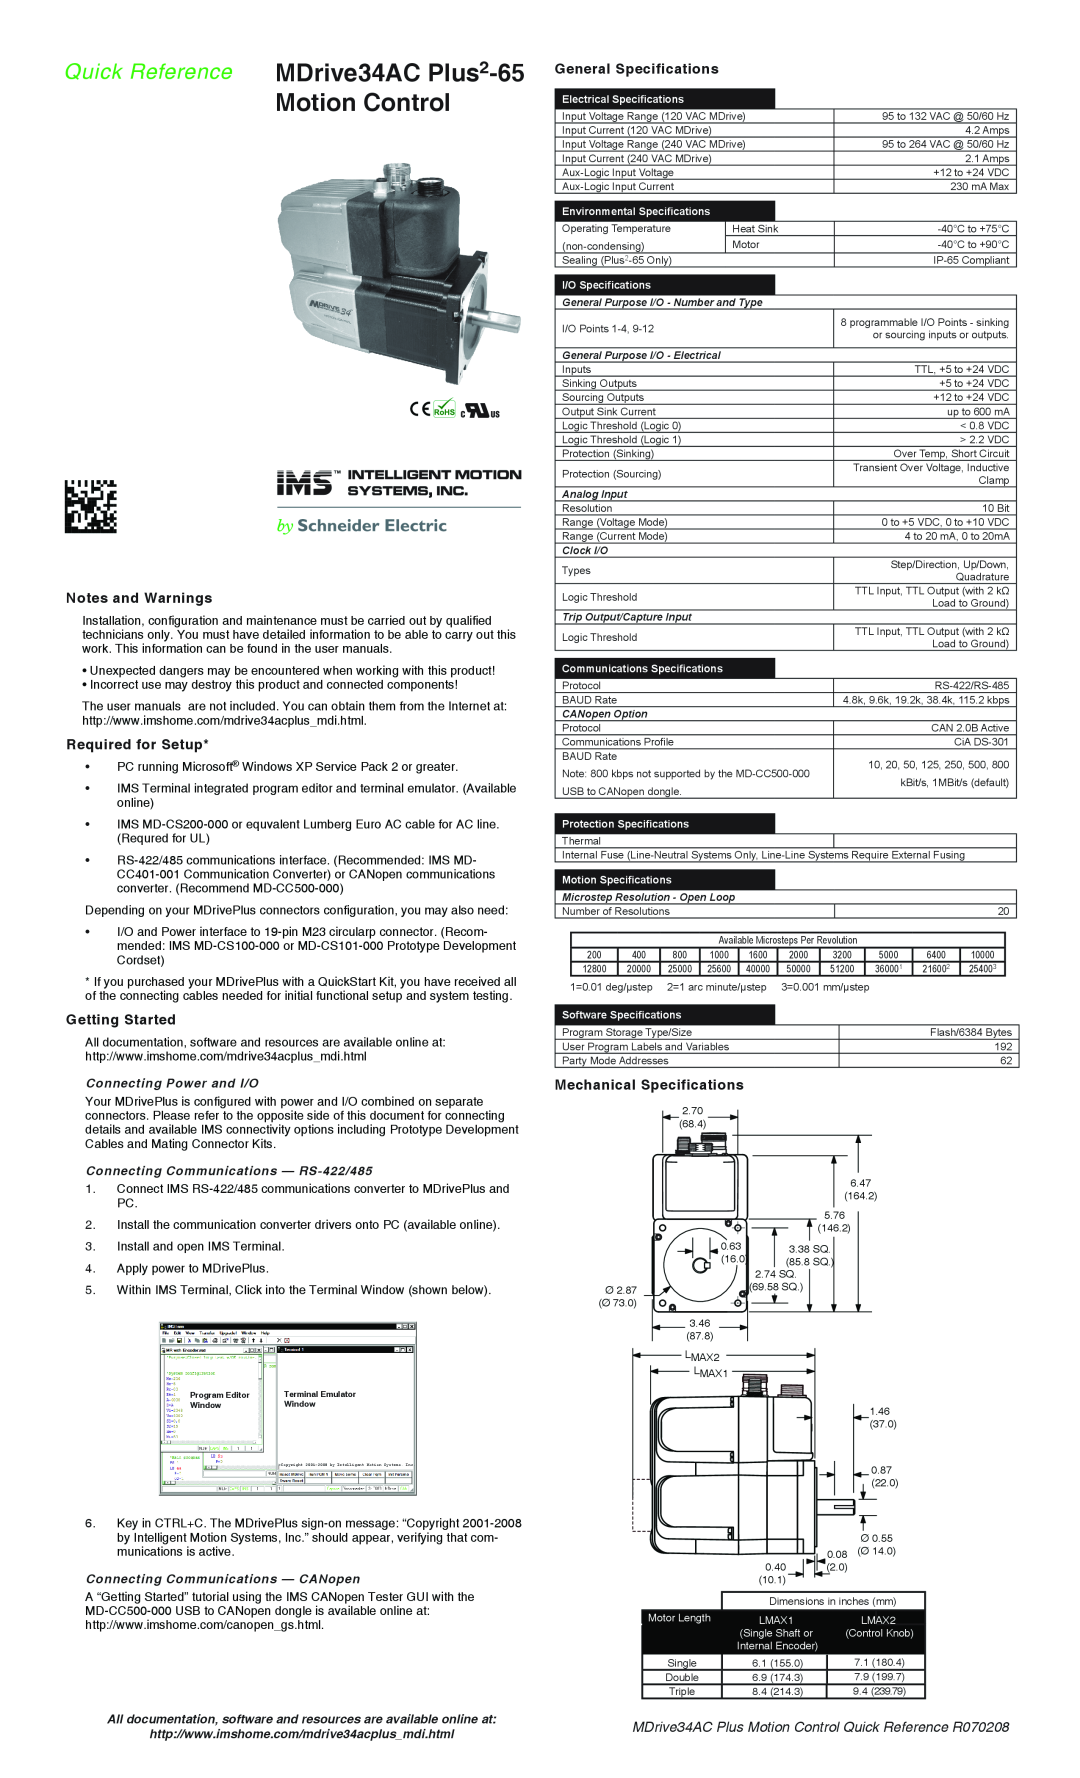 Intelligent Motion Systems MDrive34AC Plus2-65 specifications Notes and Warnings, Required for Setup, Getting Started 